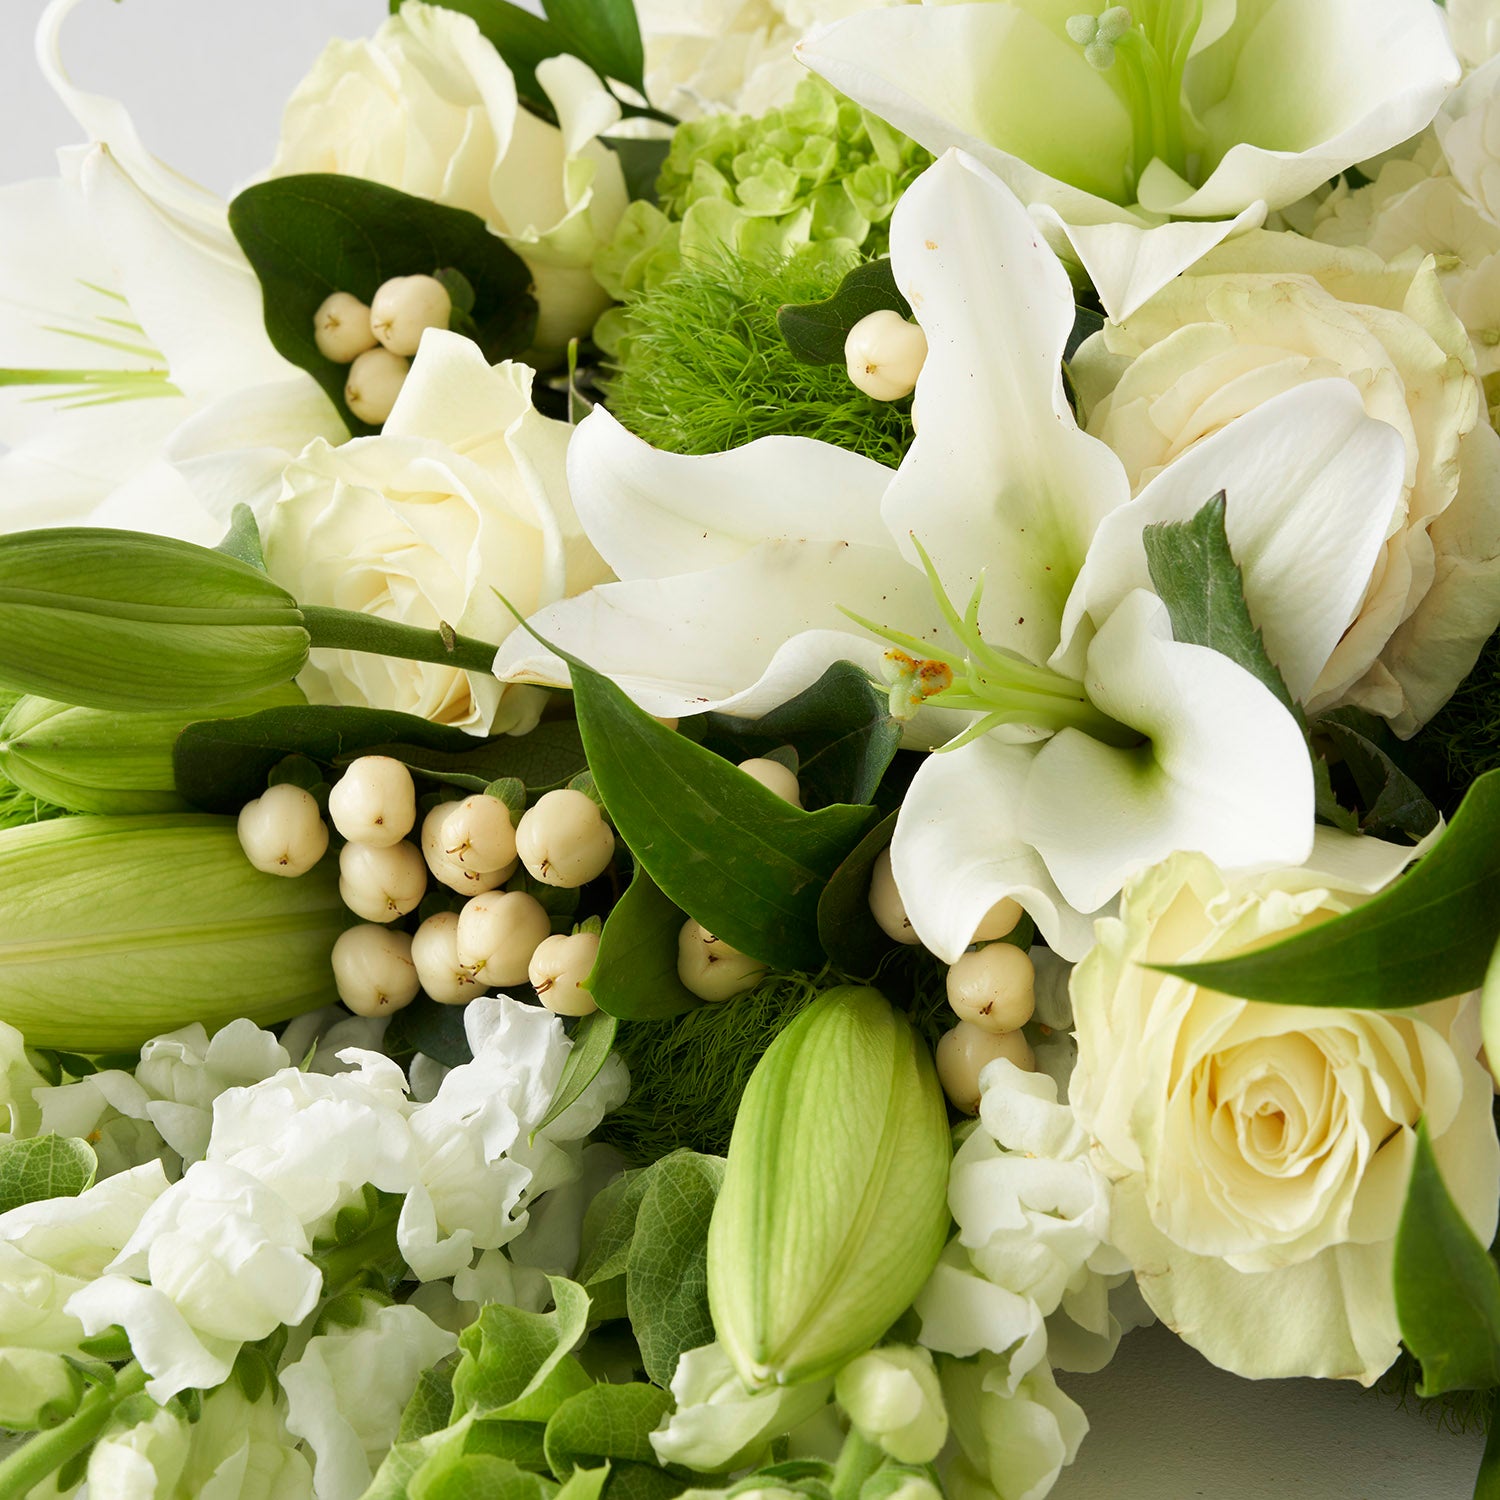 Closeup of white roses, white lilies, and cream berries.